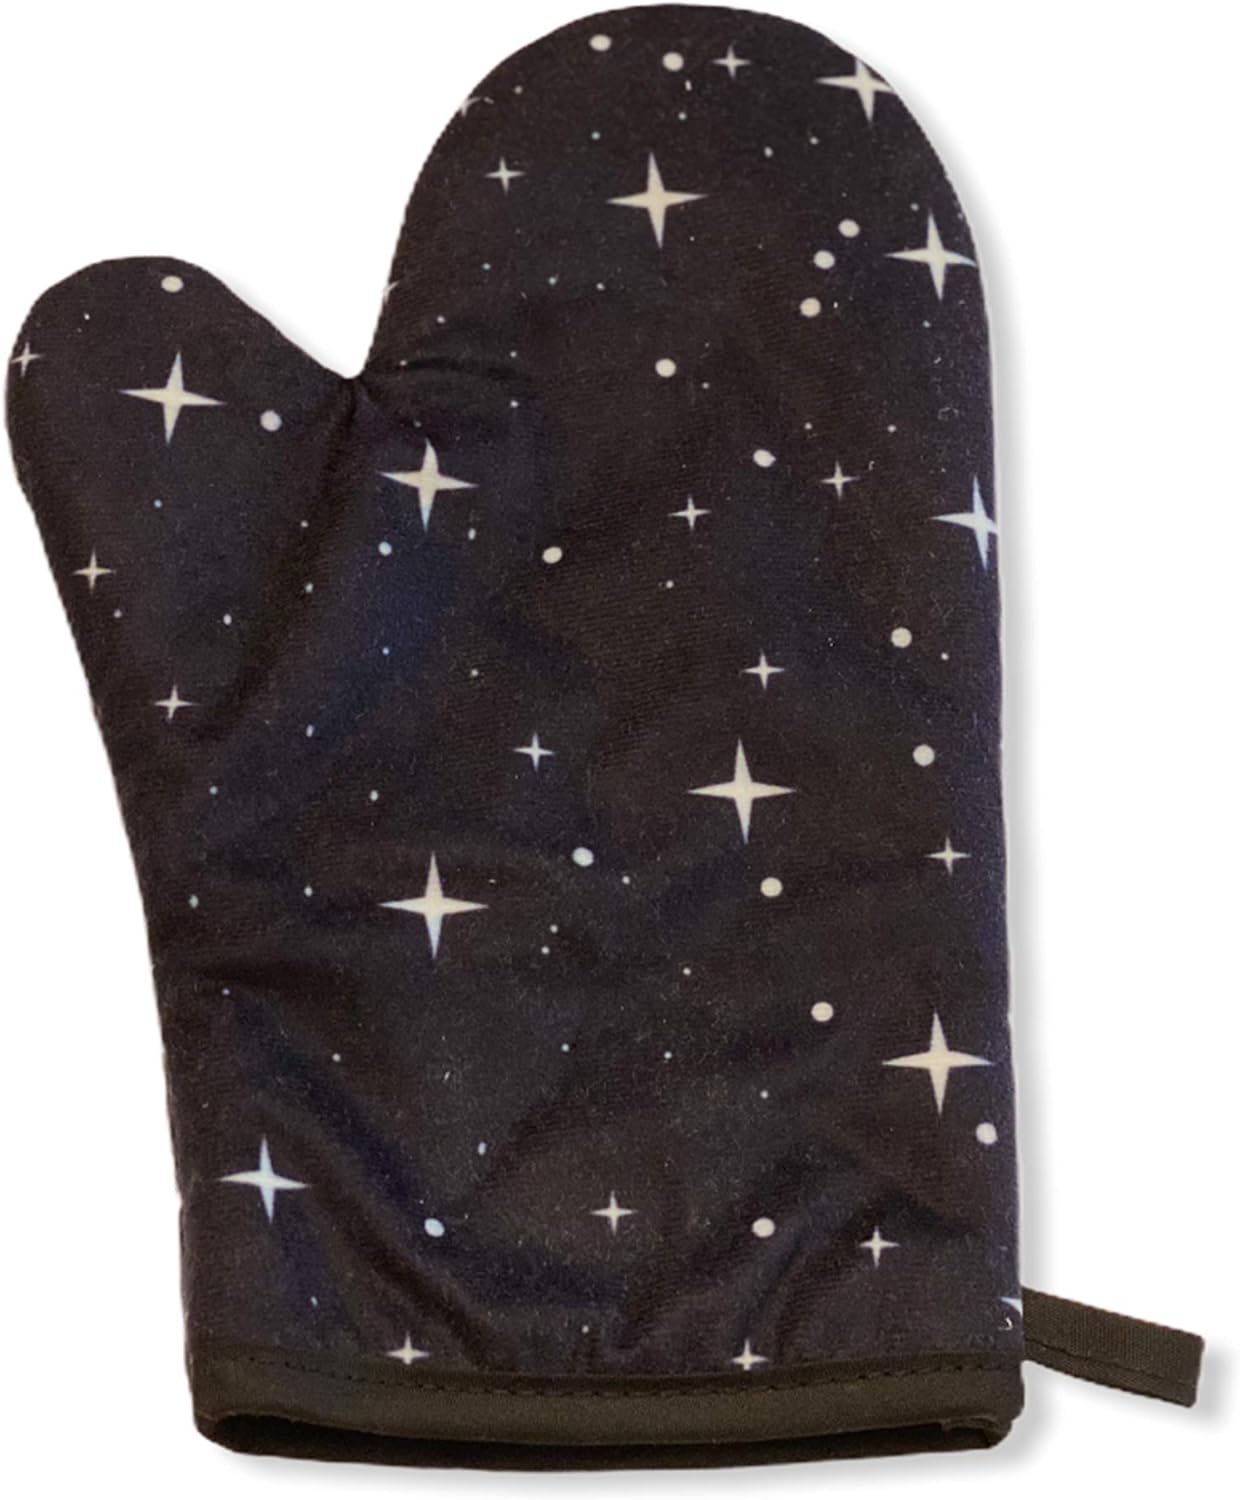 Space Hand Oven Mitt Review